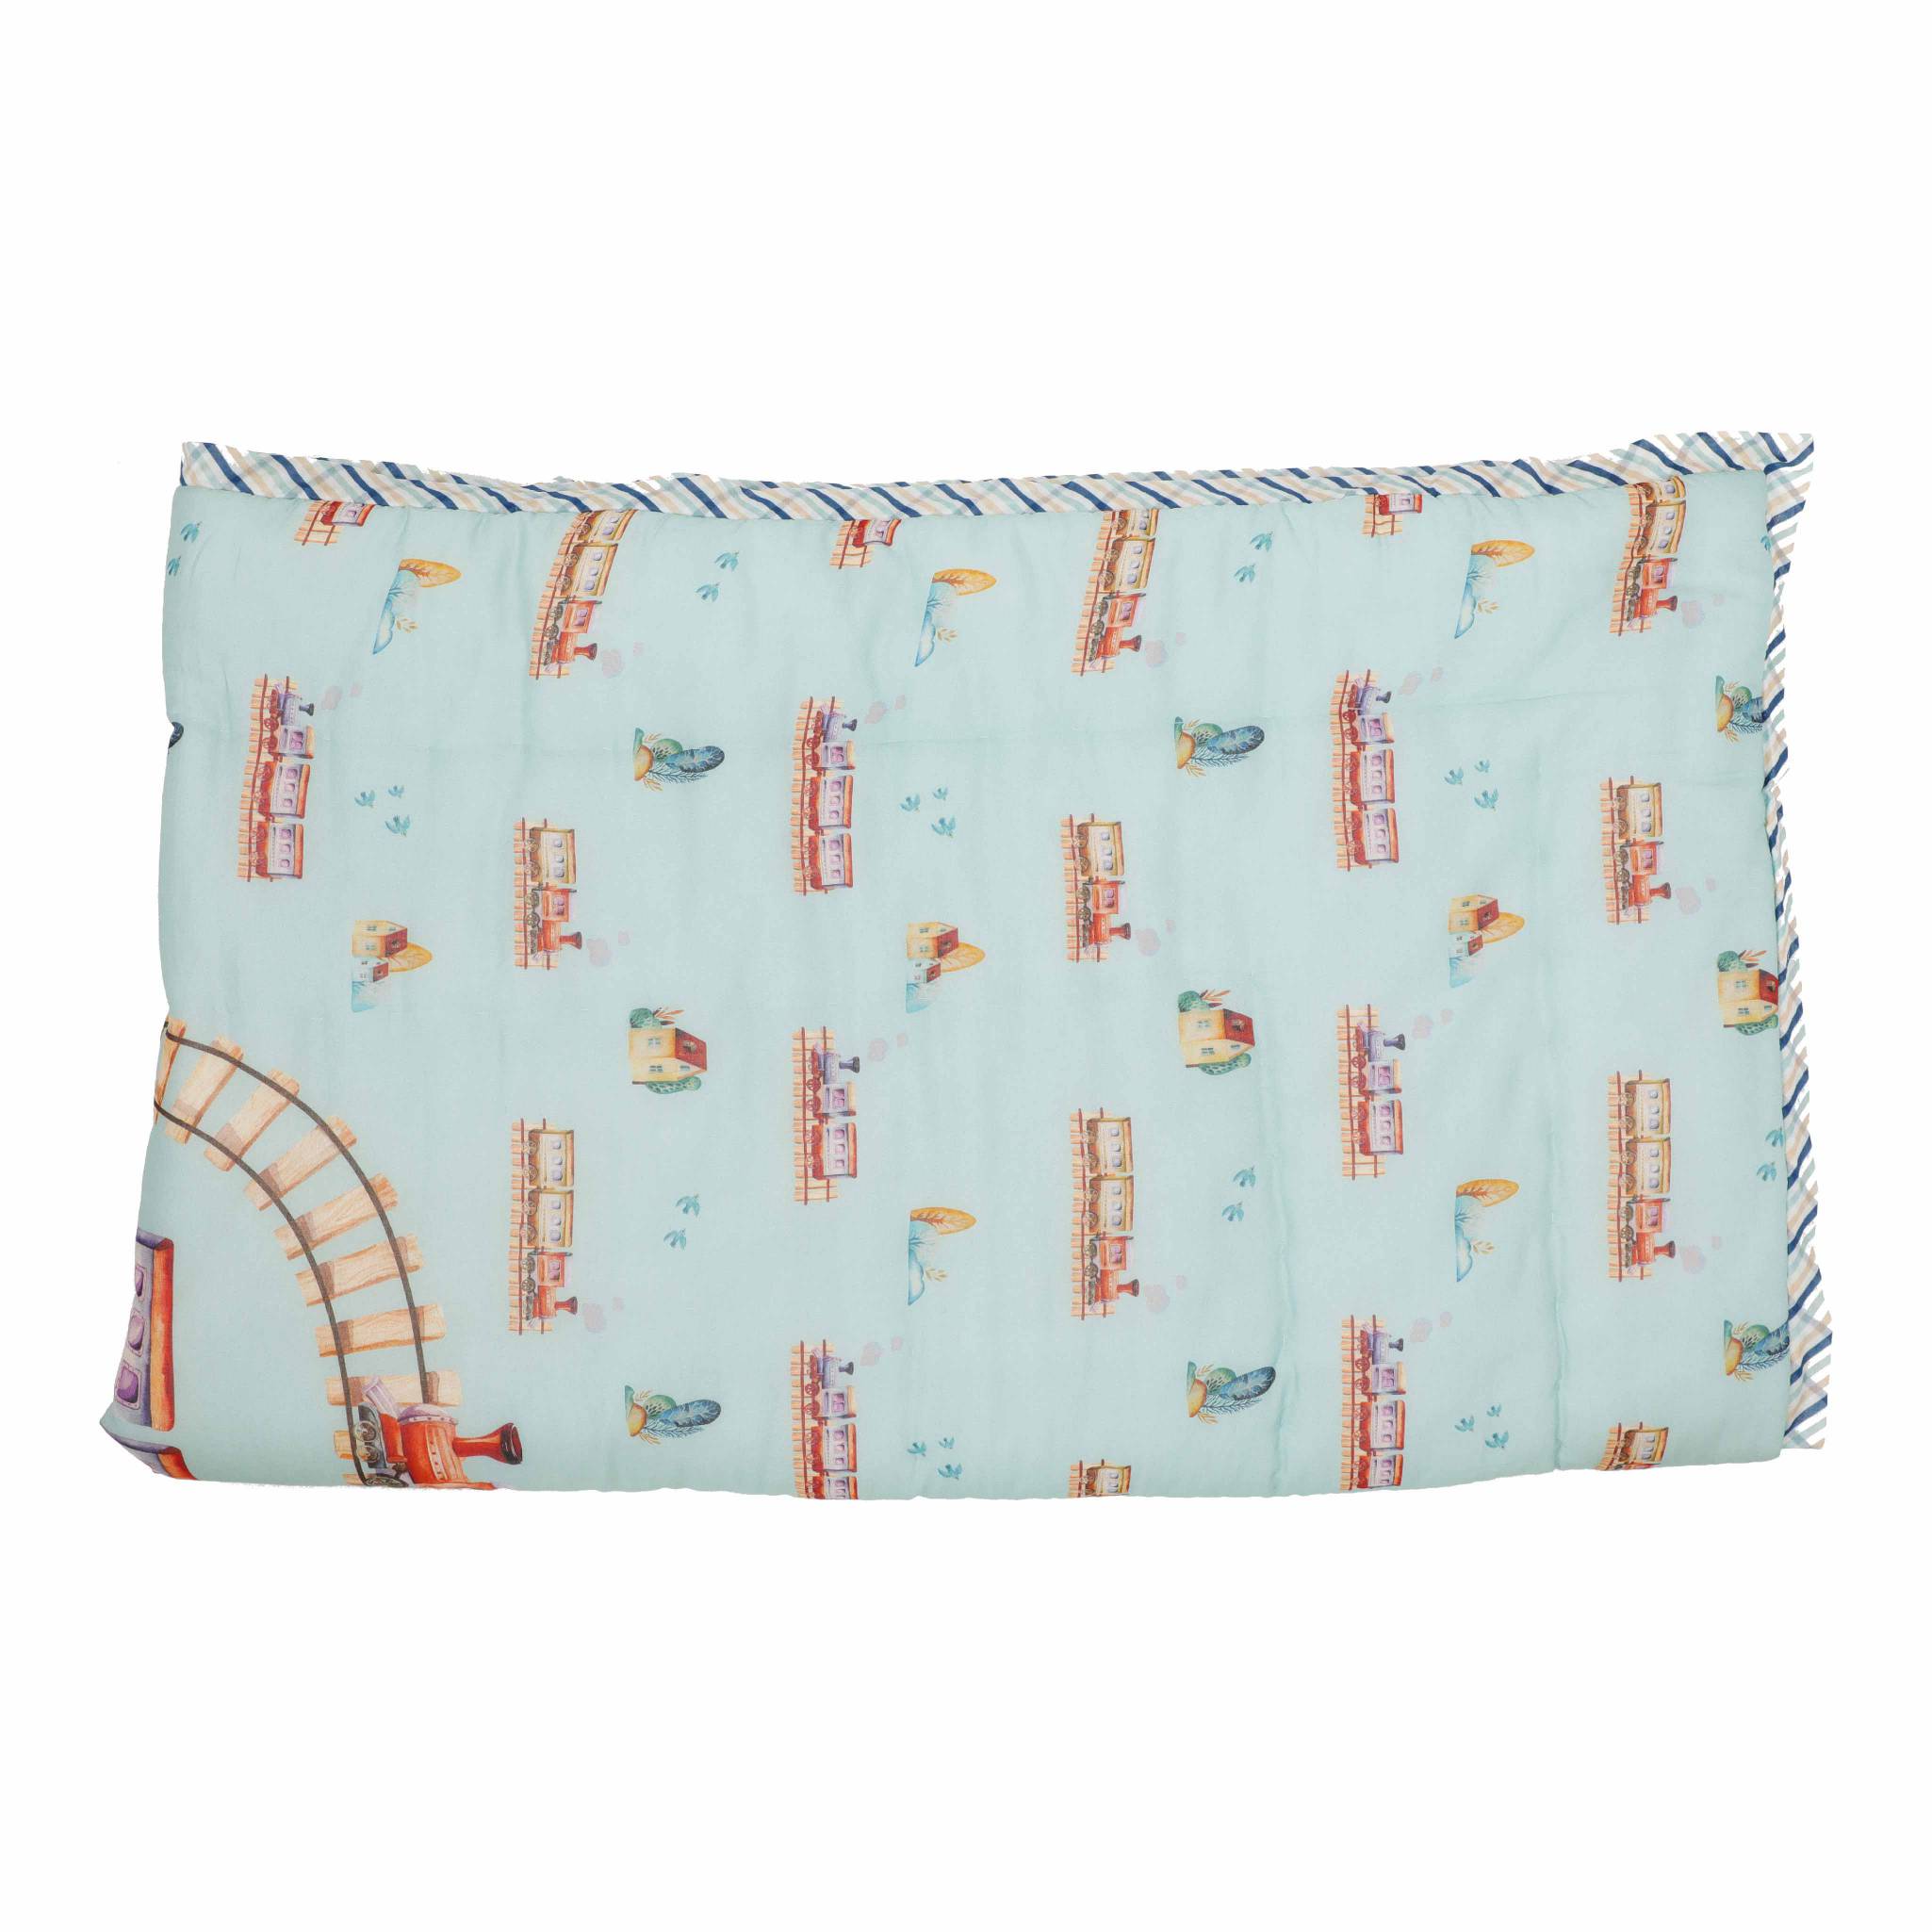 Ollie the Train - Single Bed Quilt - Nevada Sky Blue